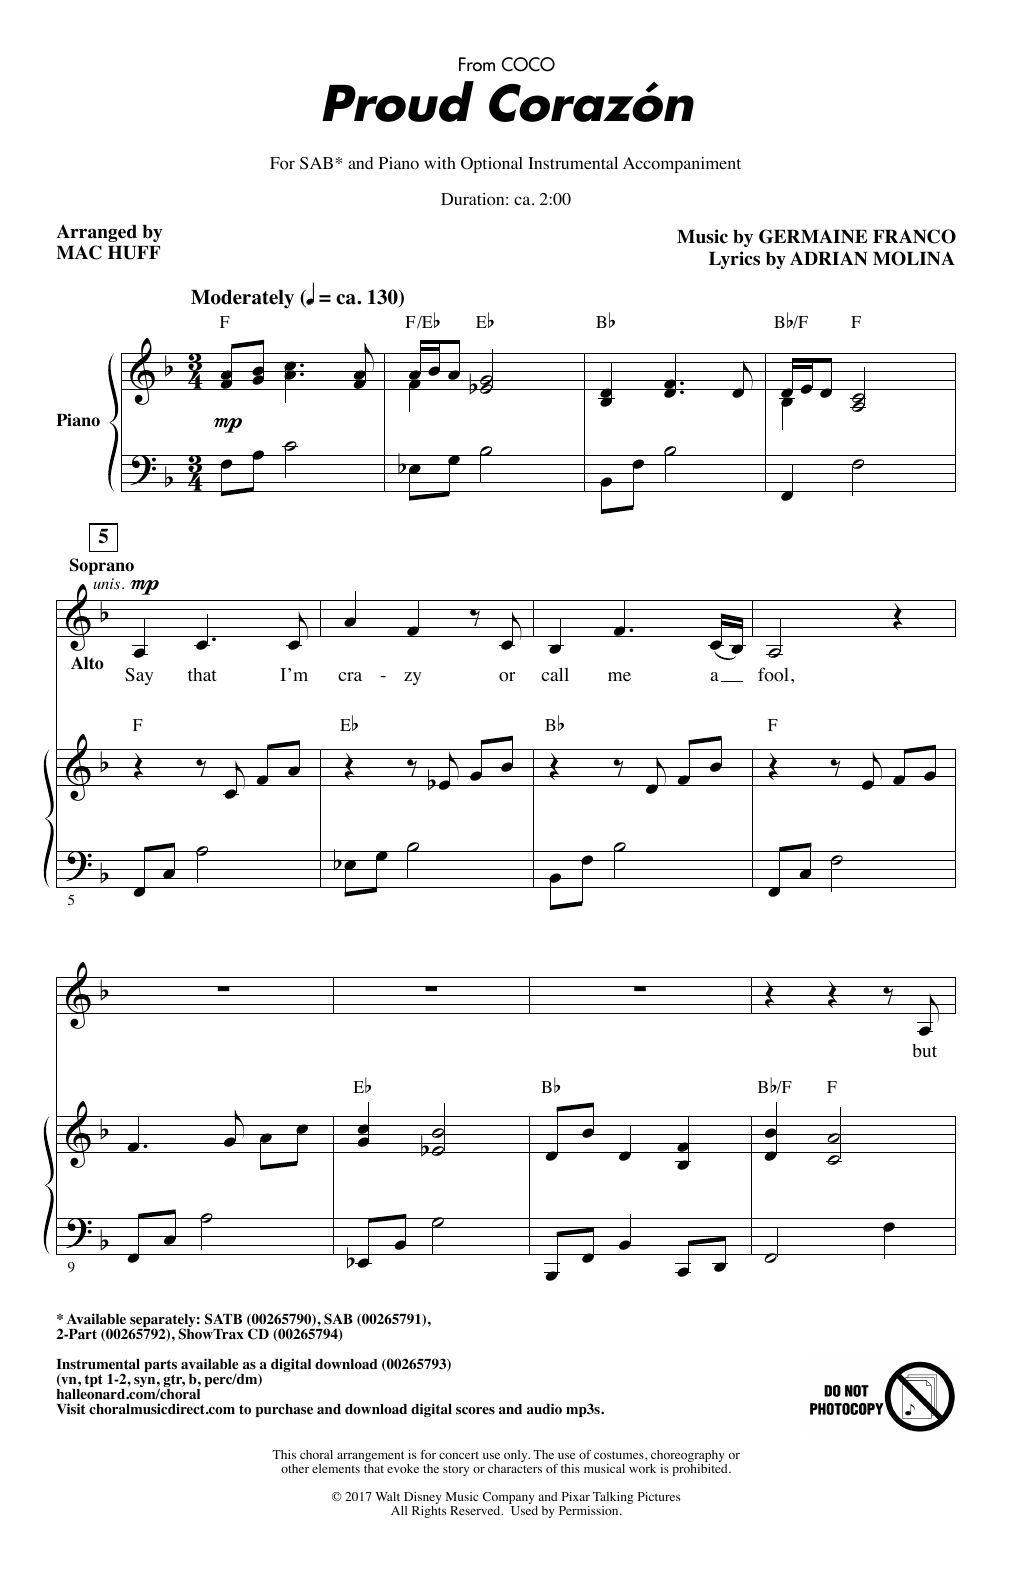 Download Germaine Franco & Adrian Molina Proud Corazon (from Coco) (arr. Mac Huf Sheet Music